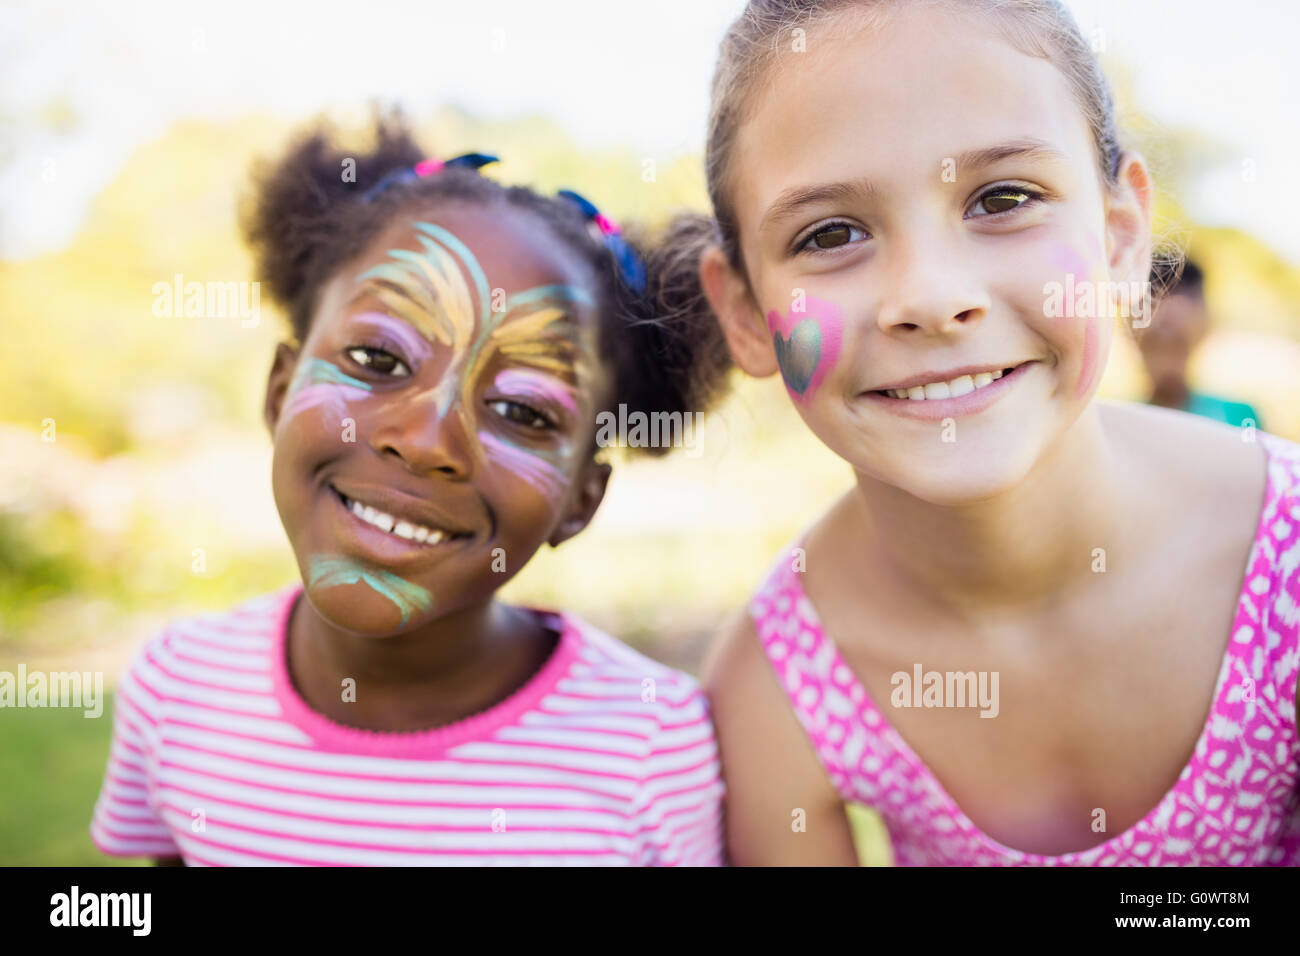 Portrait of two cute girls with make up on the face Stock Photo